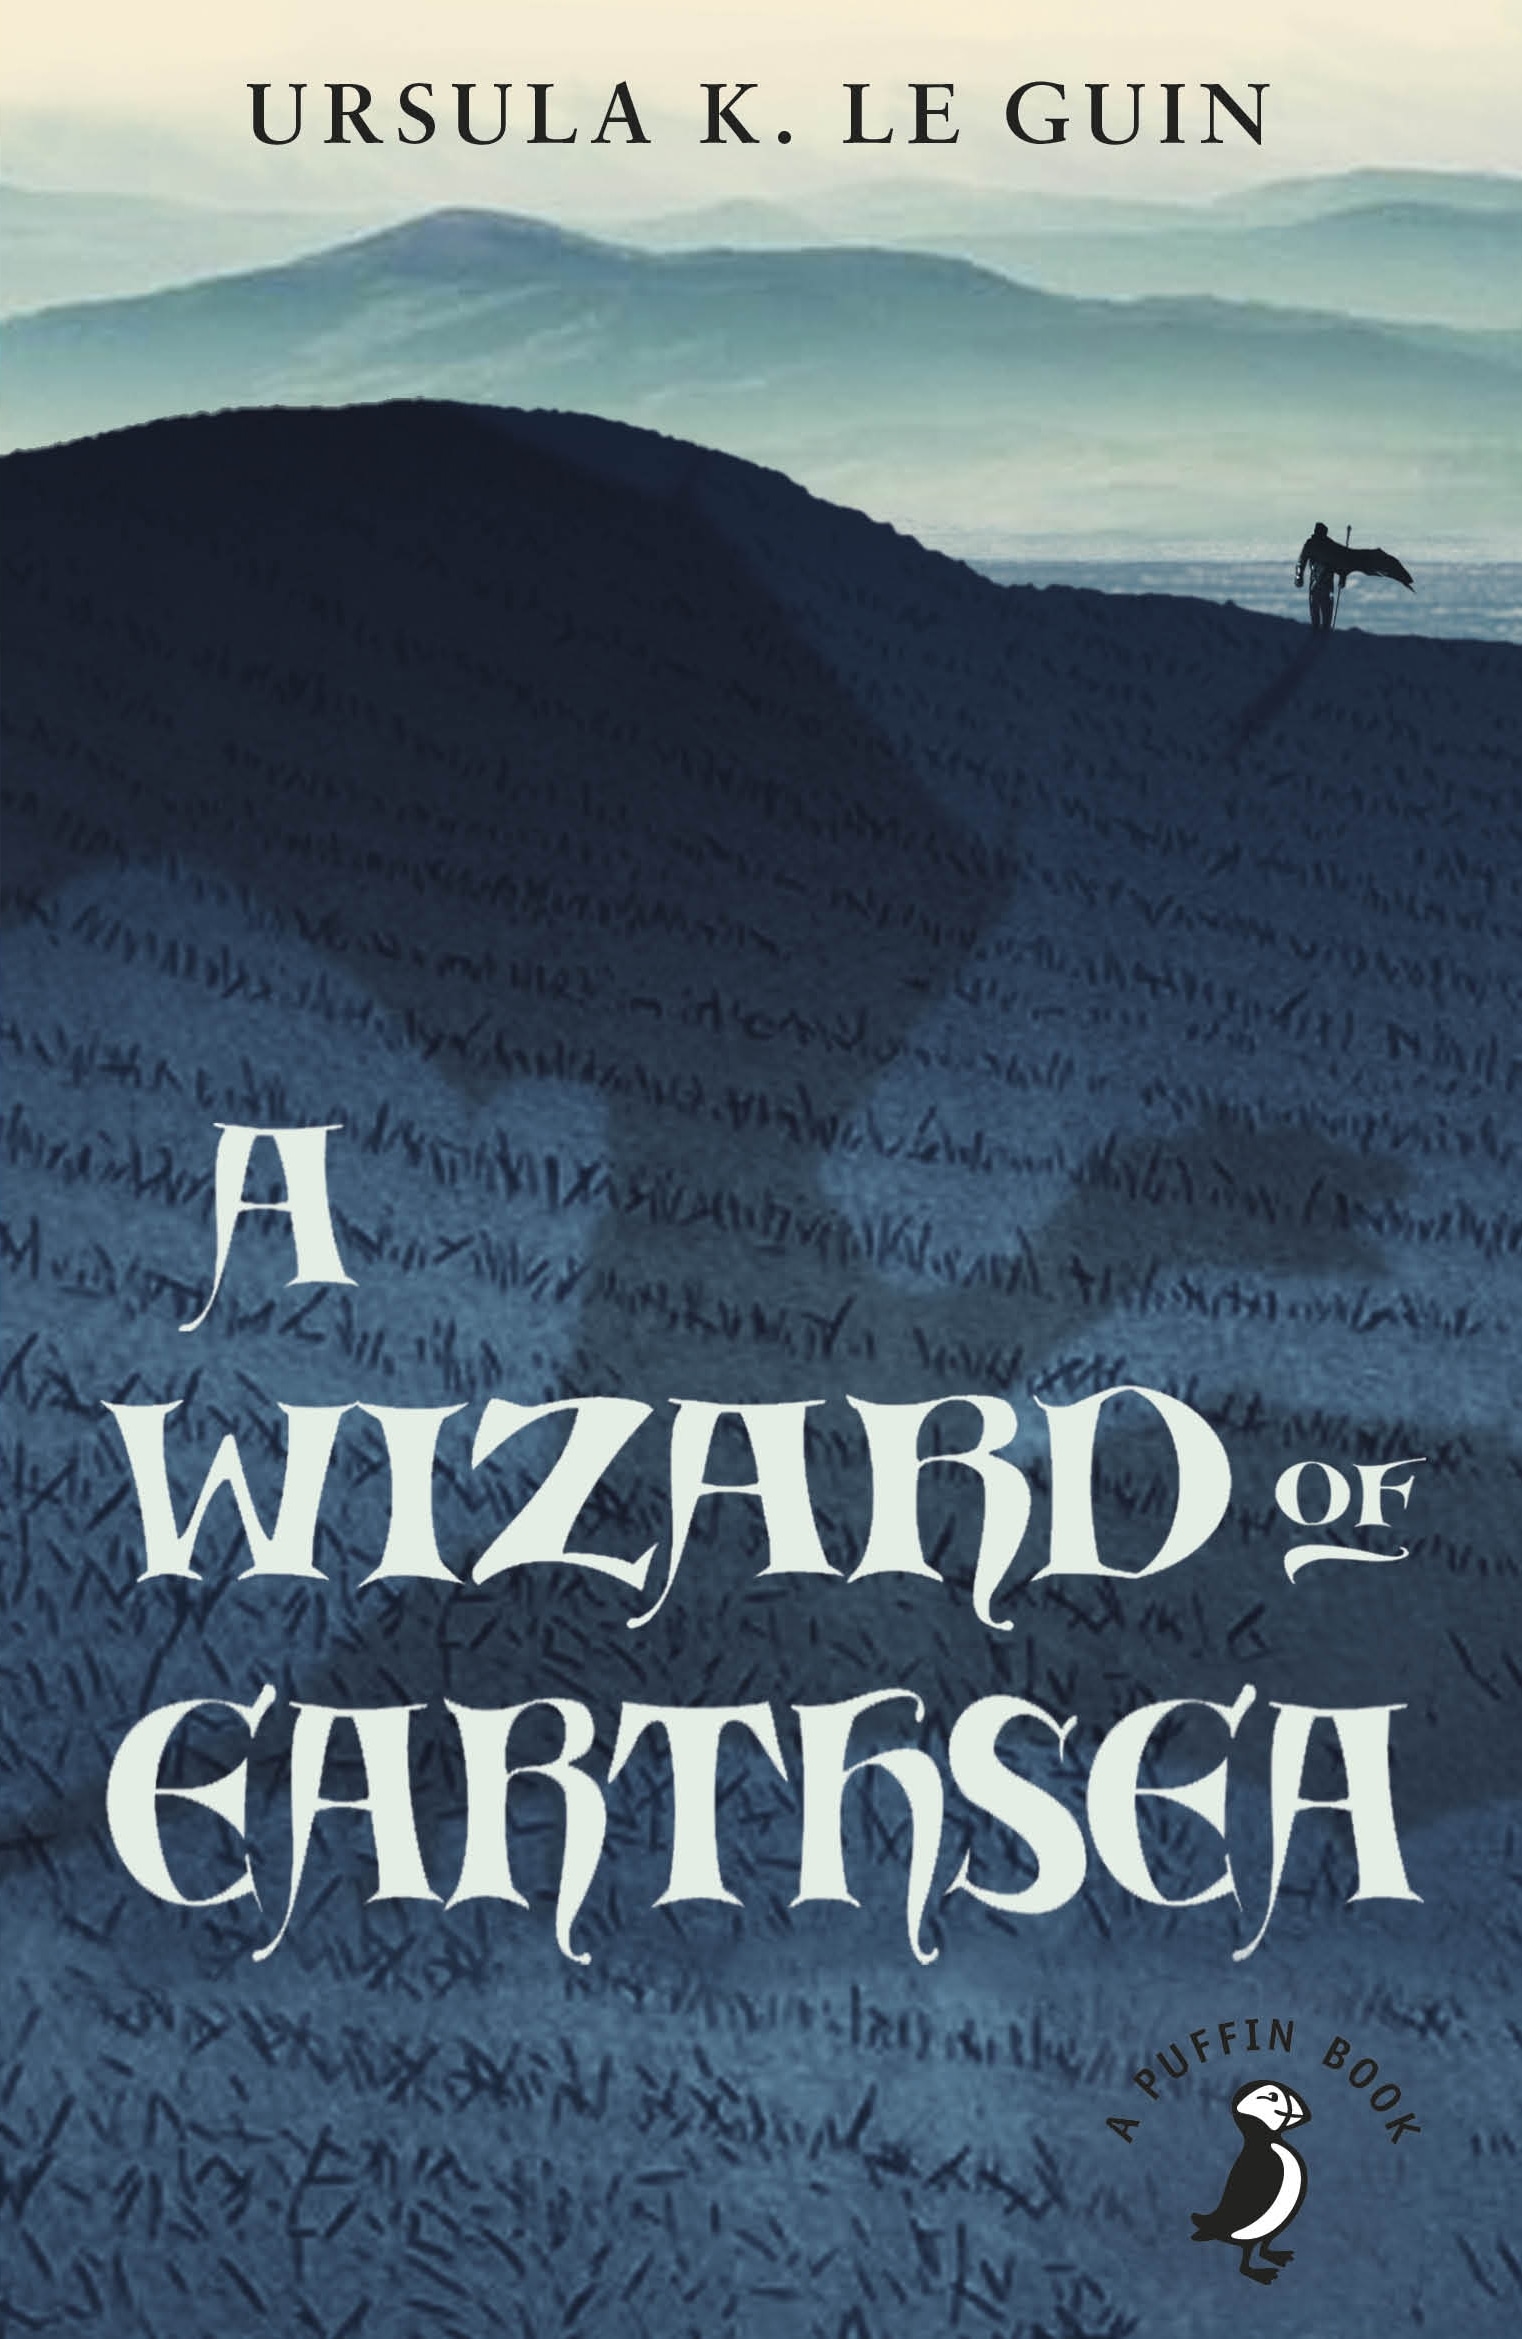 Book “A Wizard of Earthsea” by Ursula Le Guin — July 7, 2016